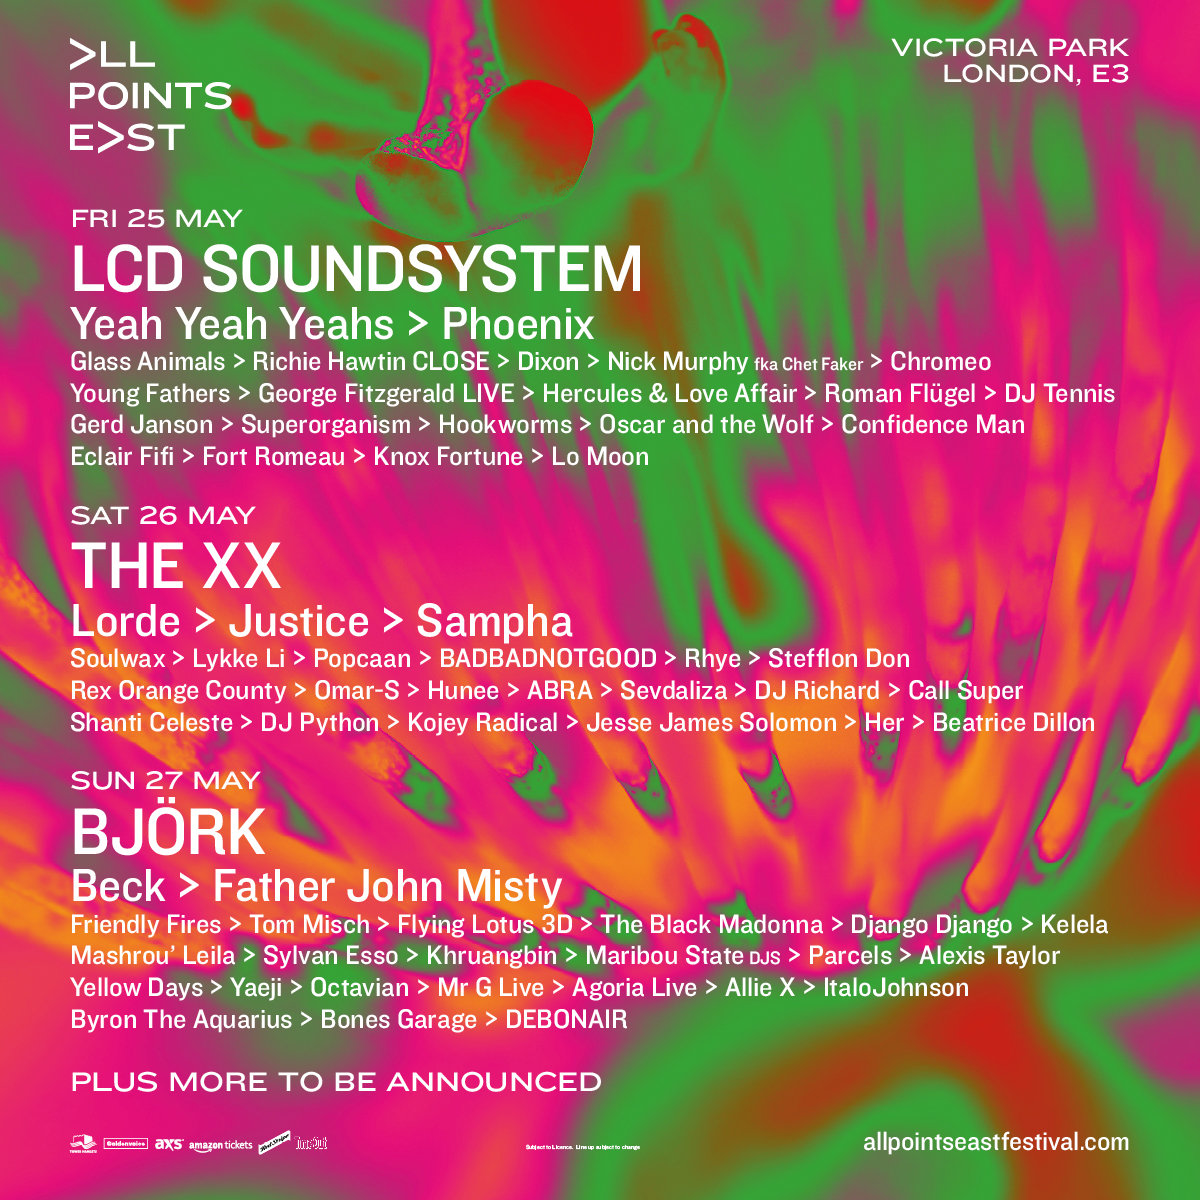 All Points East Festival news: Check out the full stage lineup for